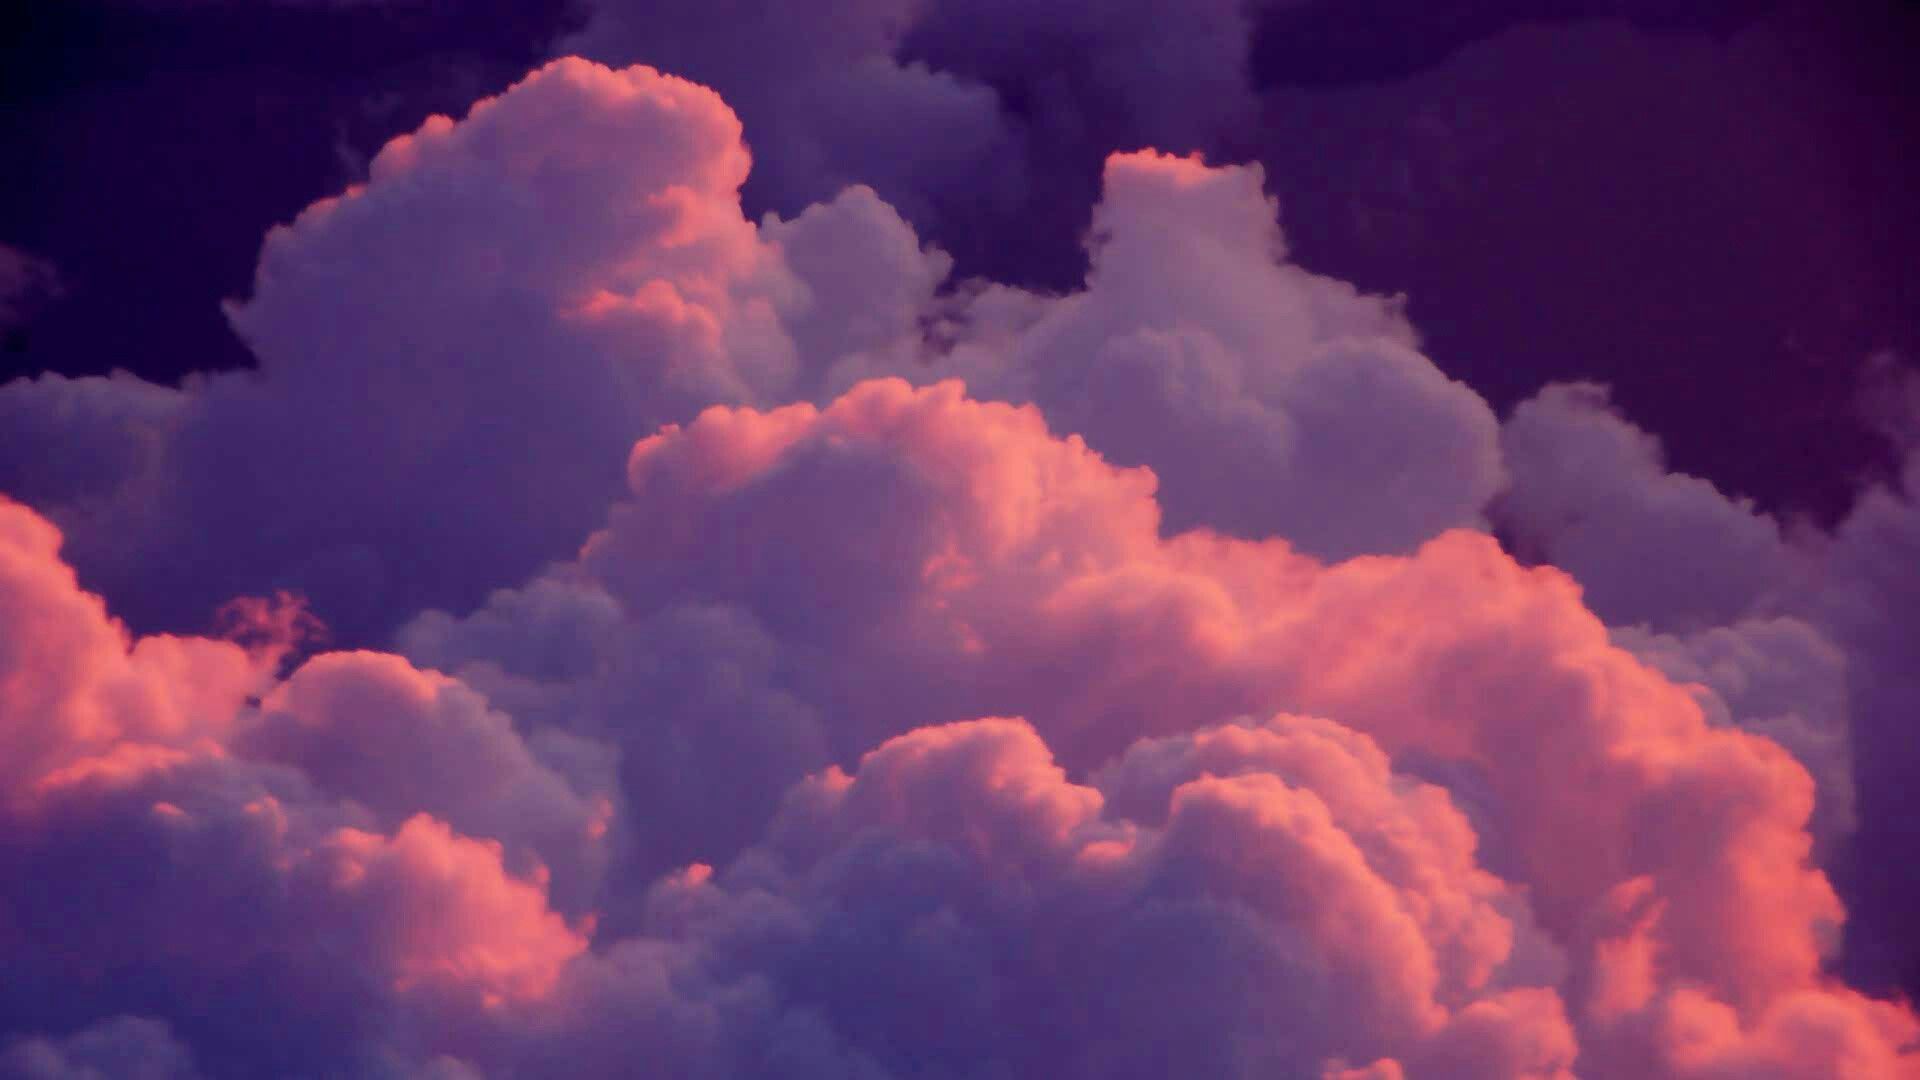 Purple Clouds Aesthetic HD Wallpapers - Wallpaper Cave